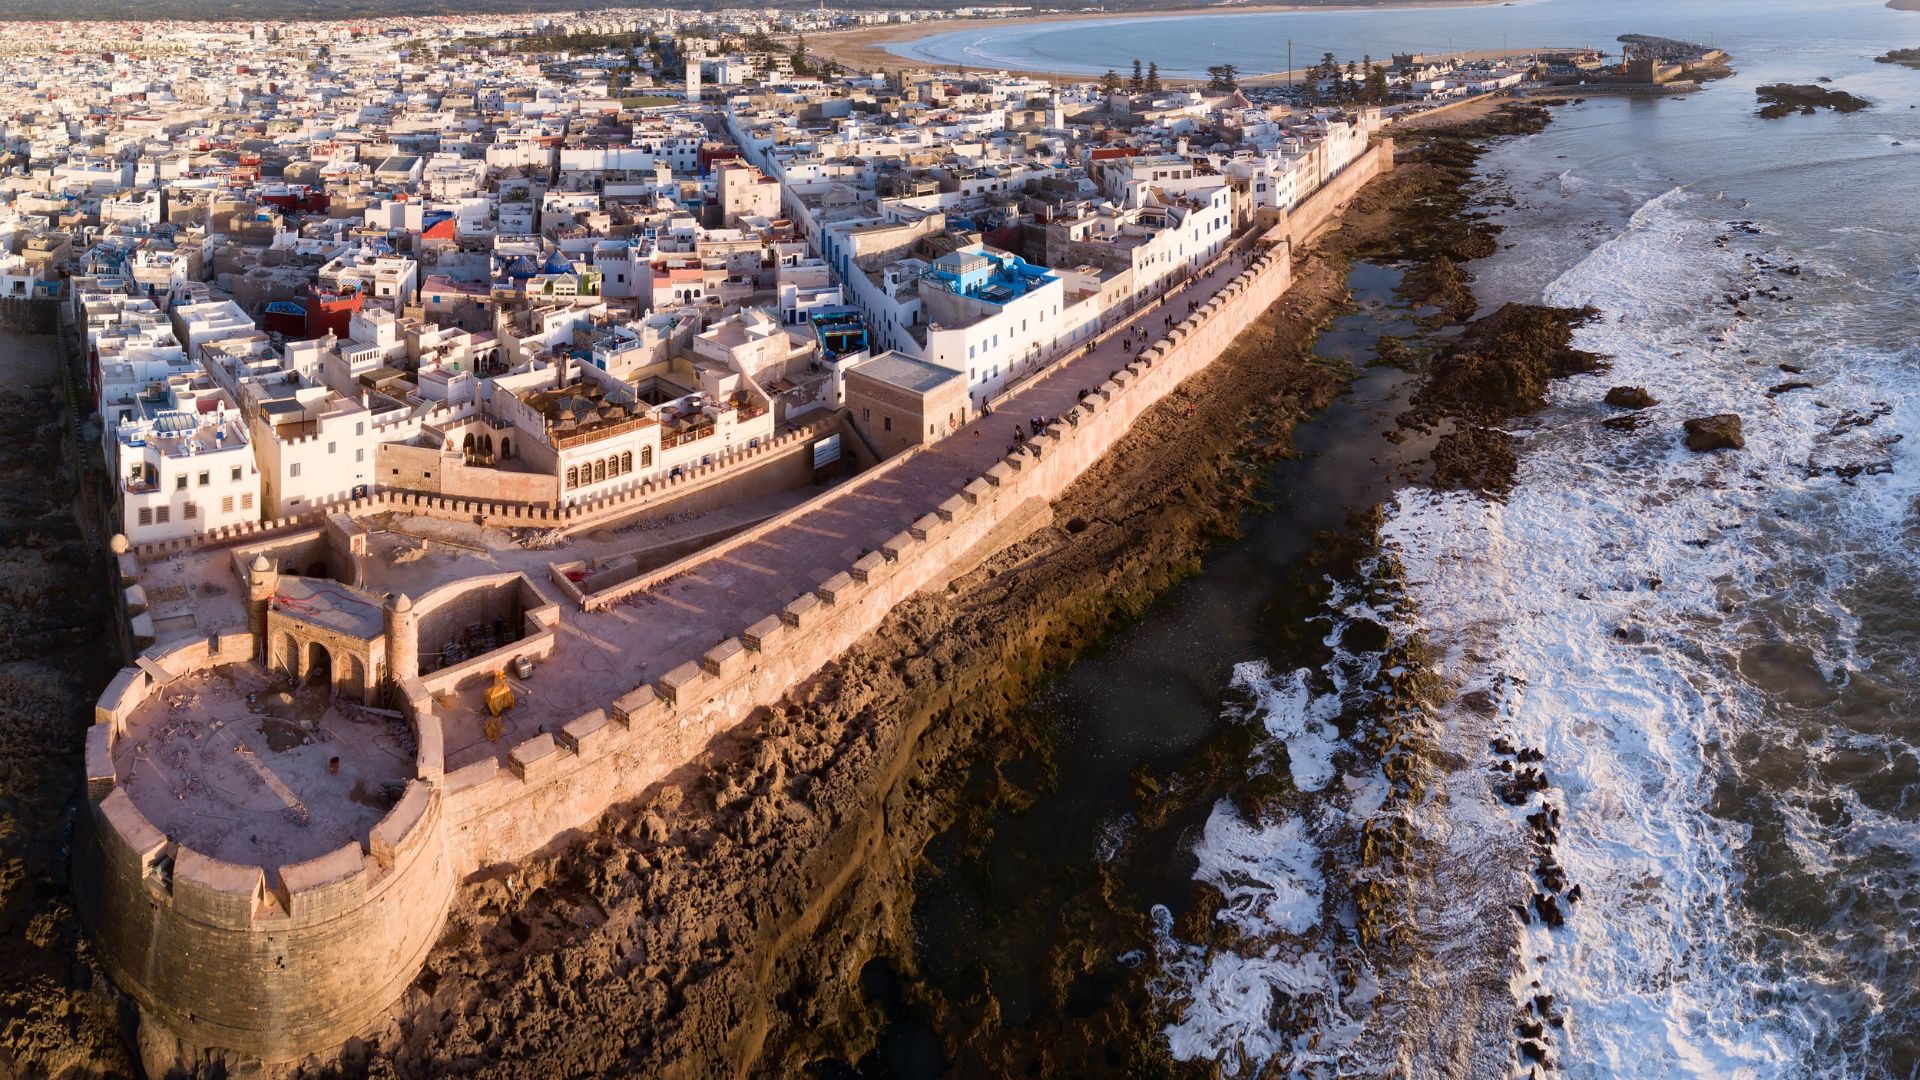 Private Excursion to Essaouira from Marrakech Full Day